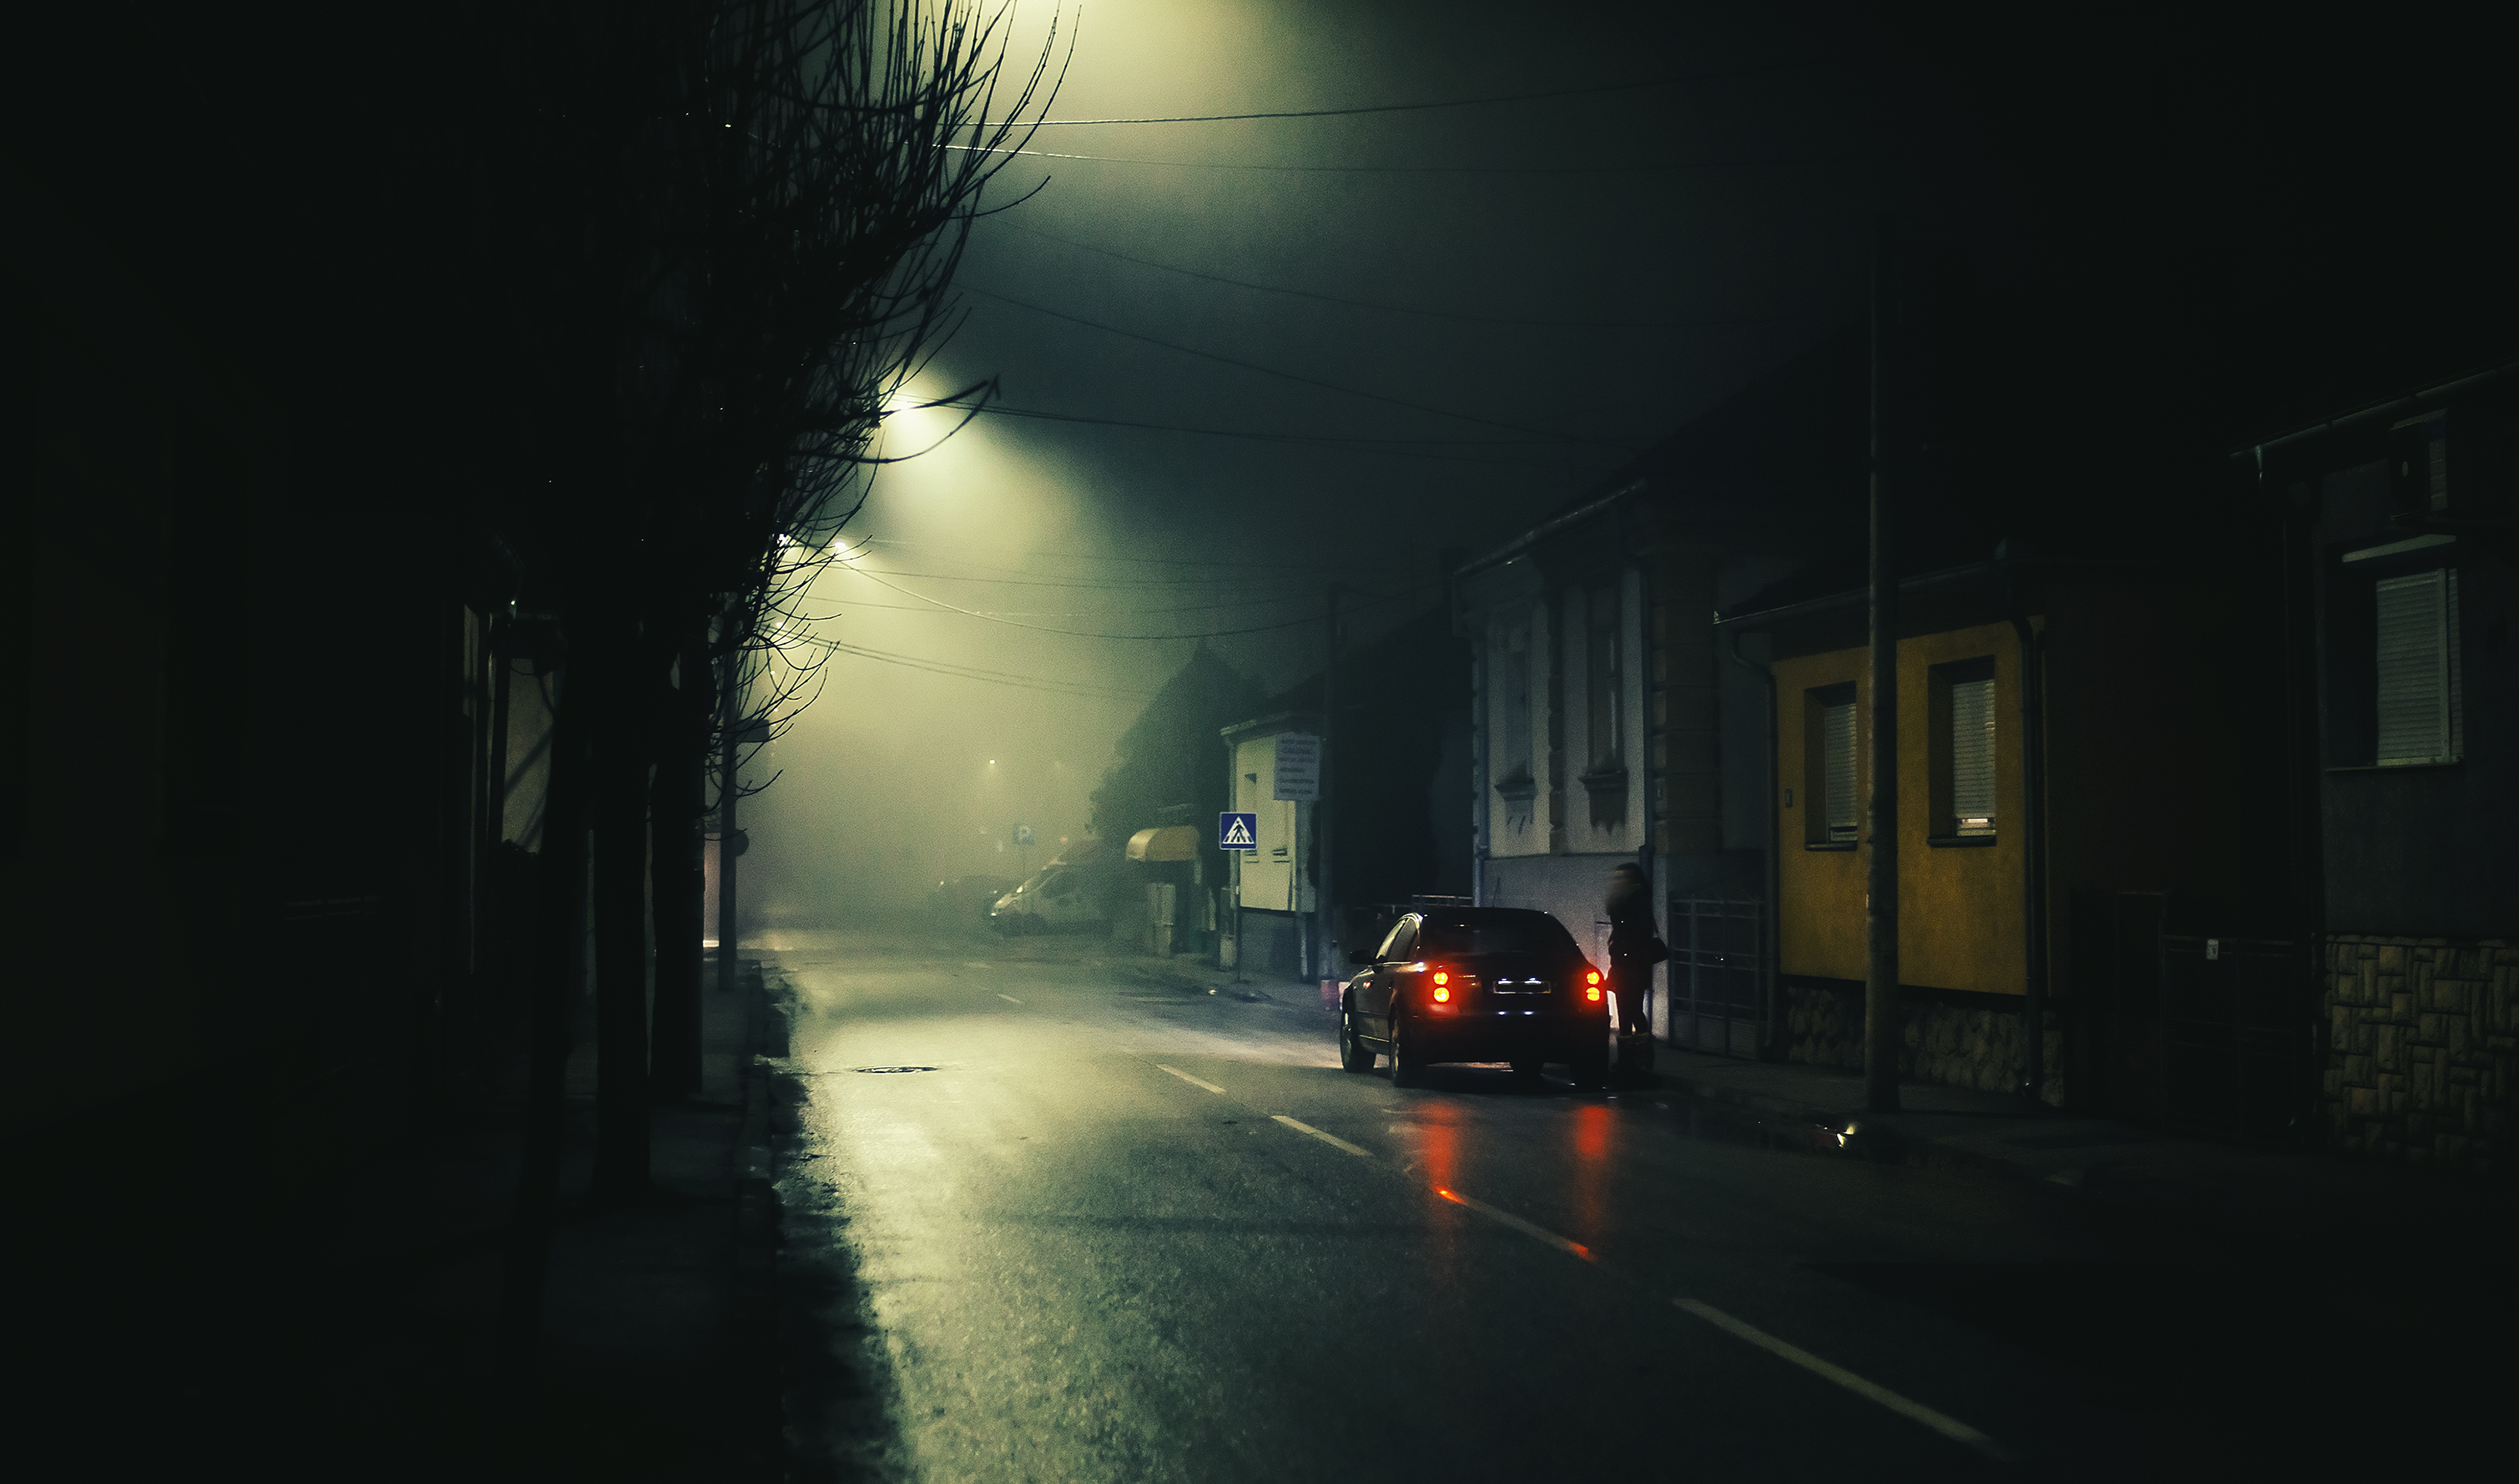 Night scene on foggy street of a small town, lonely woman and one car. | Source: Shutterstock